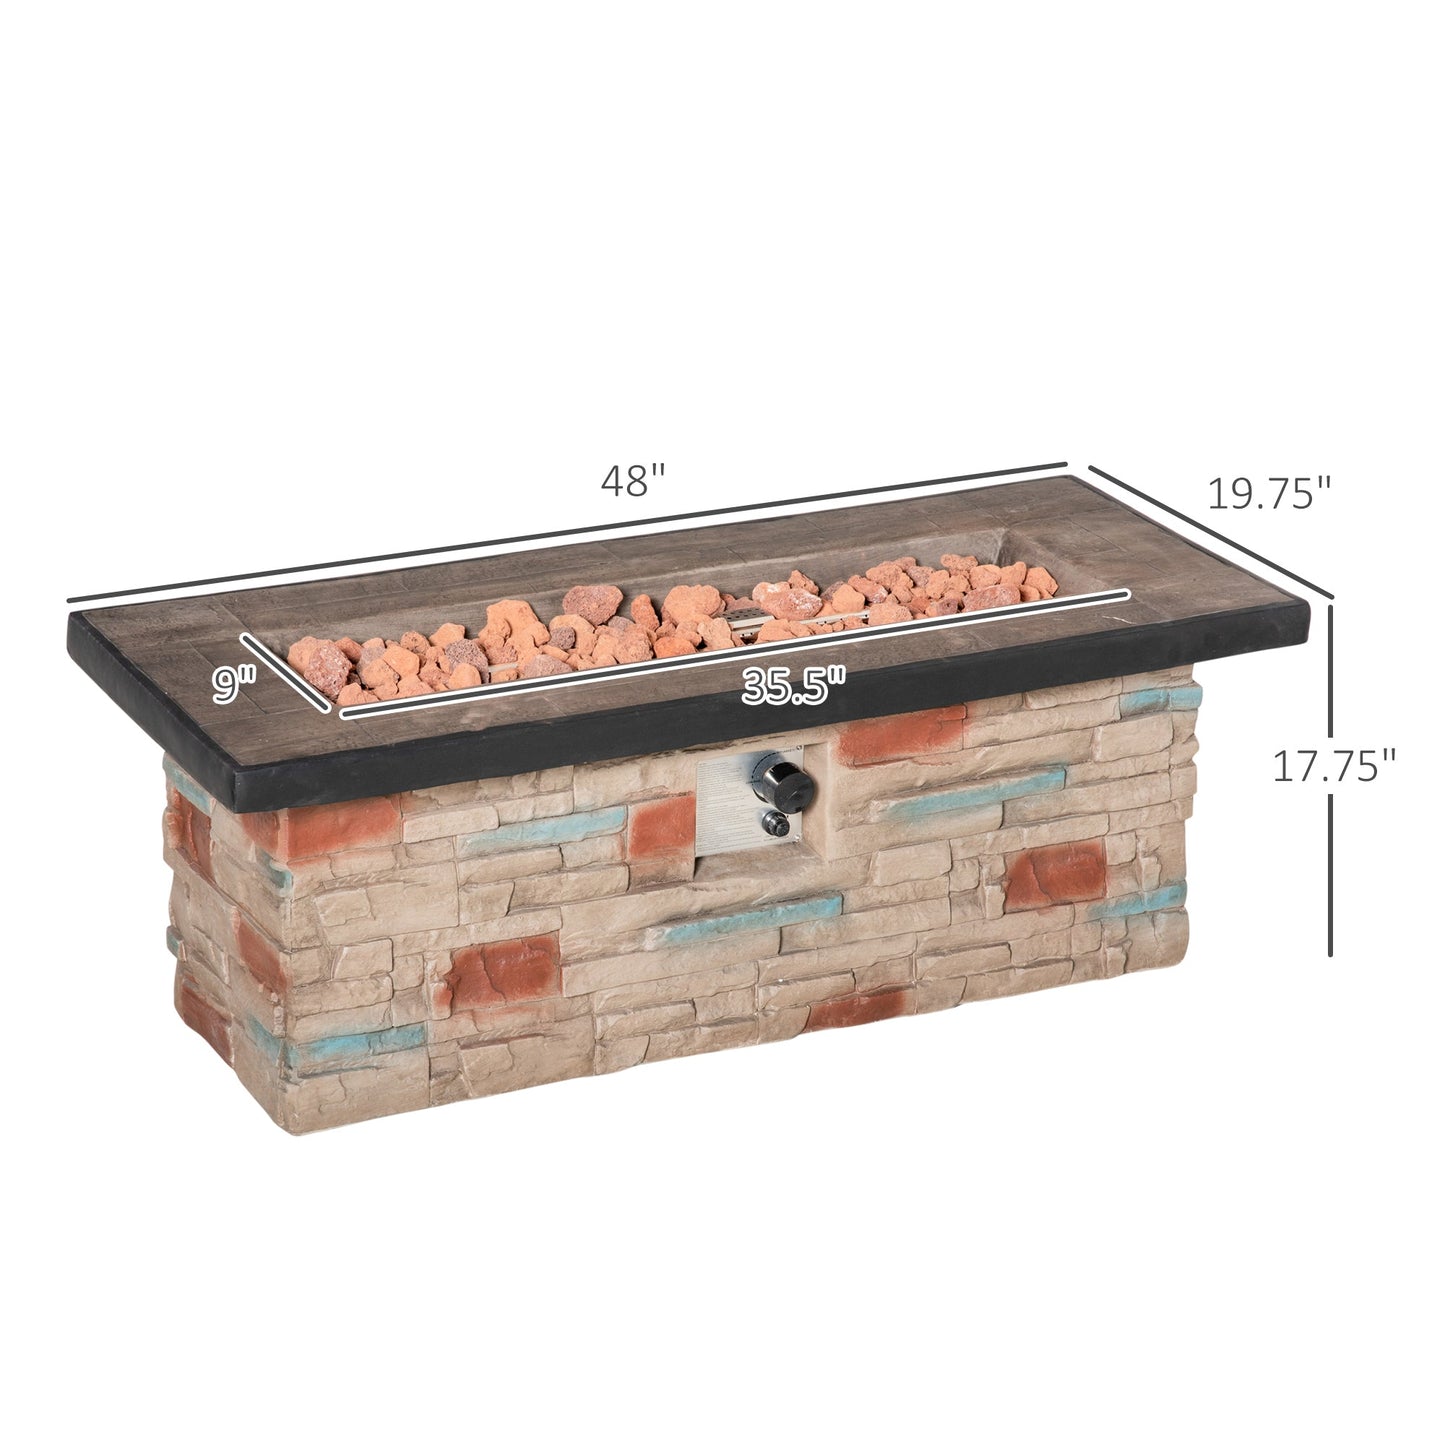 Miscellaneous-48" Propane Fire Pit Table, 50,000BTU Gas Firepit with Protective Cover, Lava Rocks, CSA Certification for Outdoor, Patio, and Poolside - Outdoor Style Company